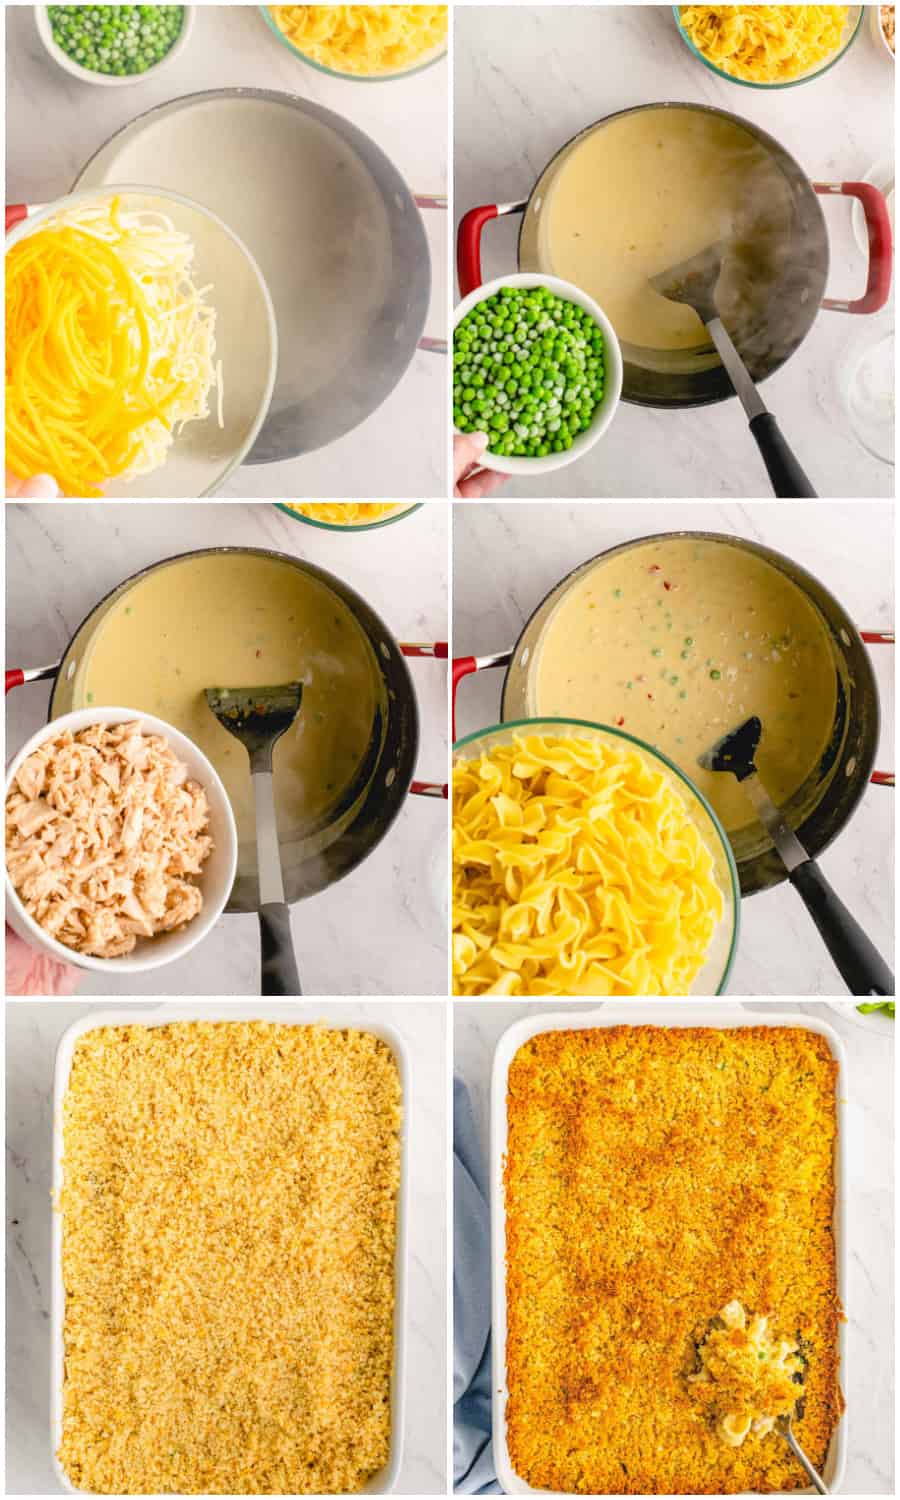 six photo collage of how to make tuna noodle casserole. The top left picture is of cheese being poured into a pot, the top right picture is of peas above a pot, the middle left picture is of tuna above a pot, the middle right picture is of noodles above a pot, the bottom left picture is of the tuna noodle casserole before being baked, and the bottom right picture is of the tuna noodle casserole after being baked